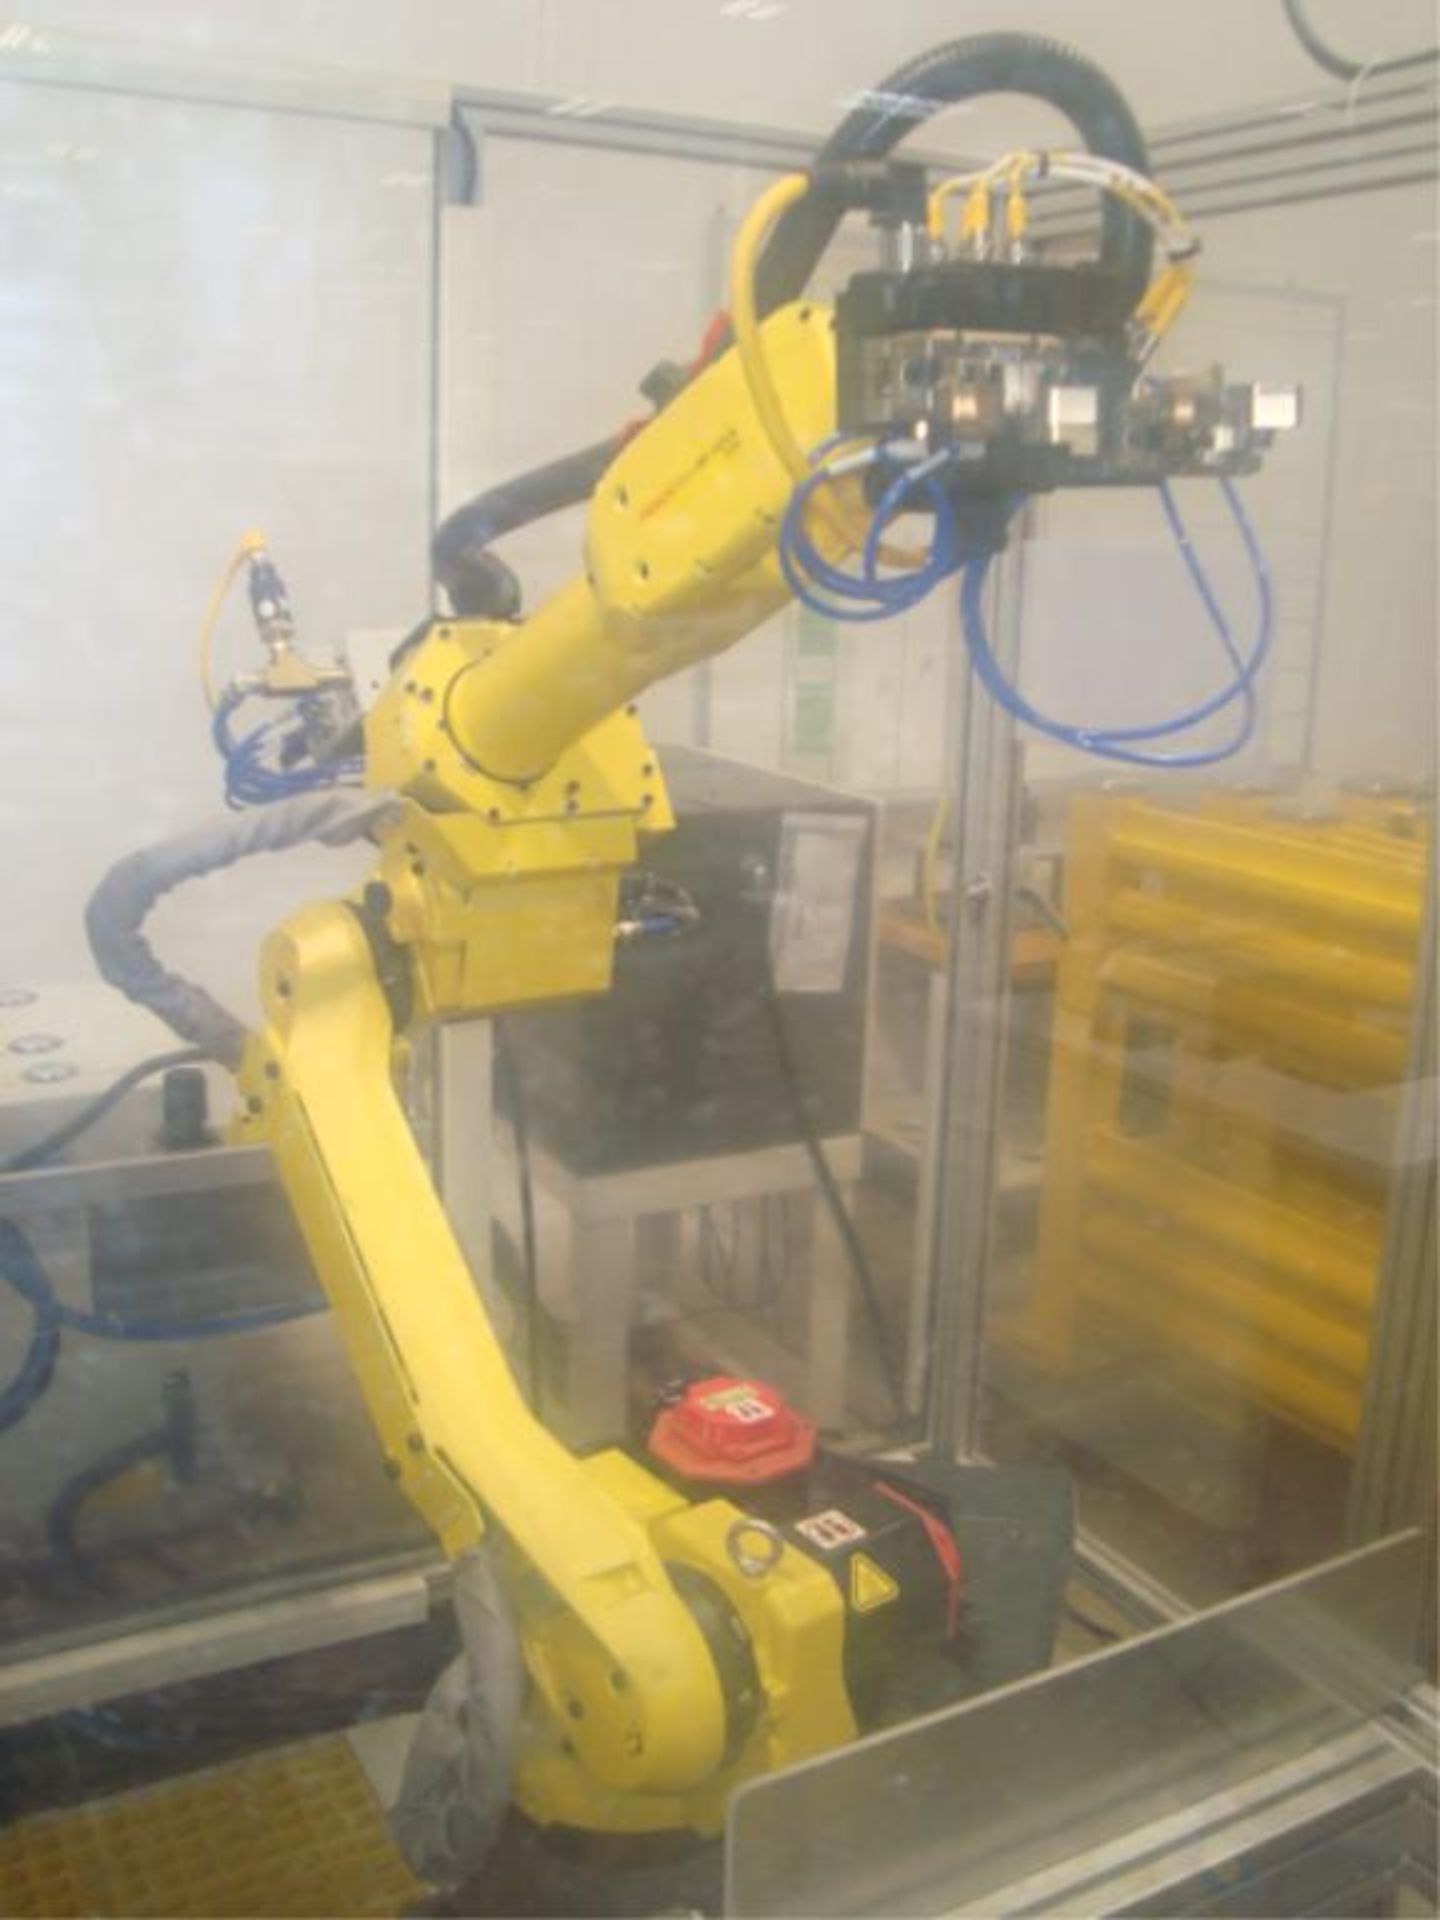 Fanuc Robodrill Alpha-D21MiA5 with Fanuc M-10iA 6-Axis Robot - Image 7 of 60